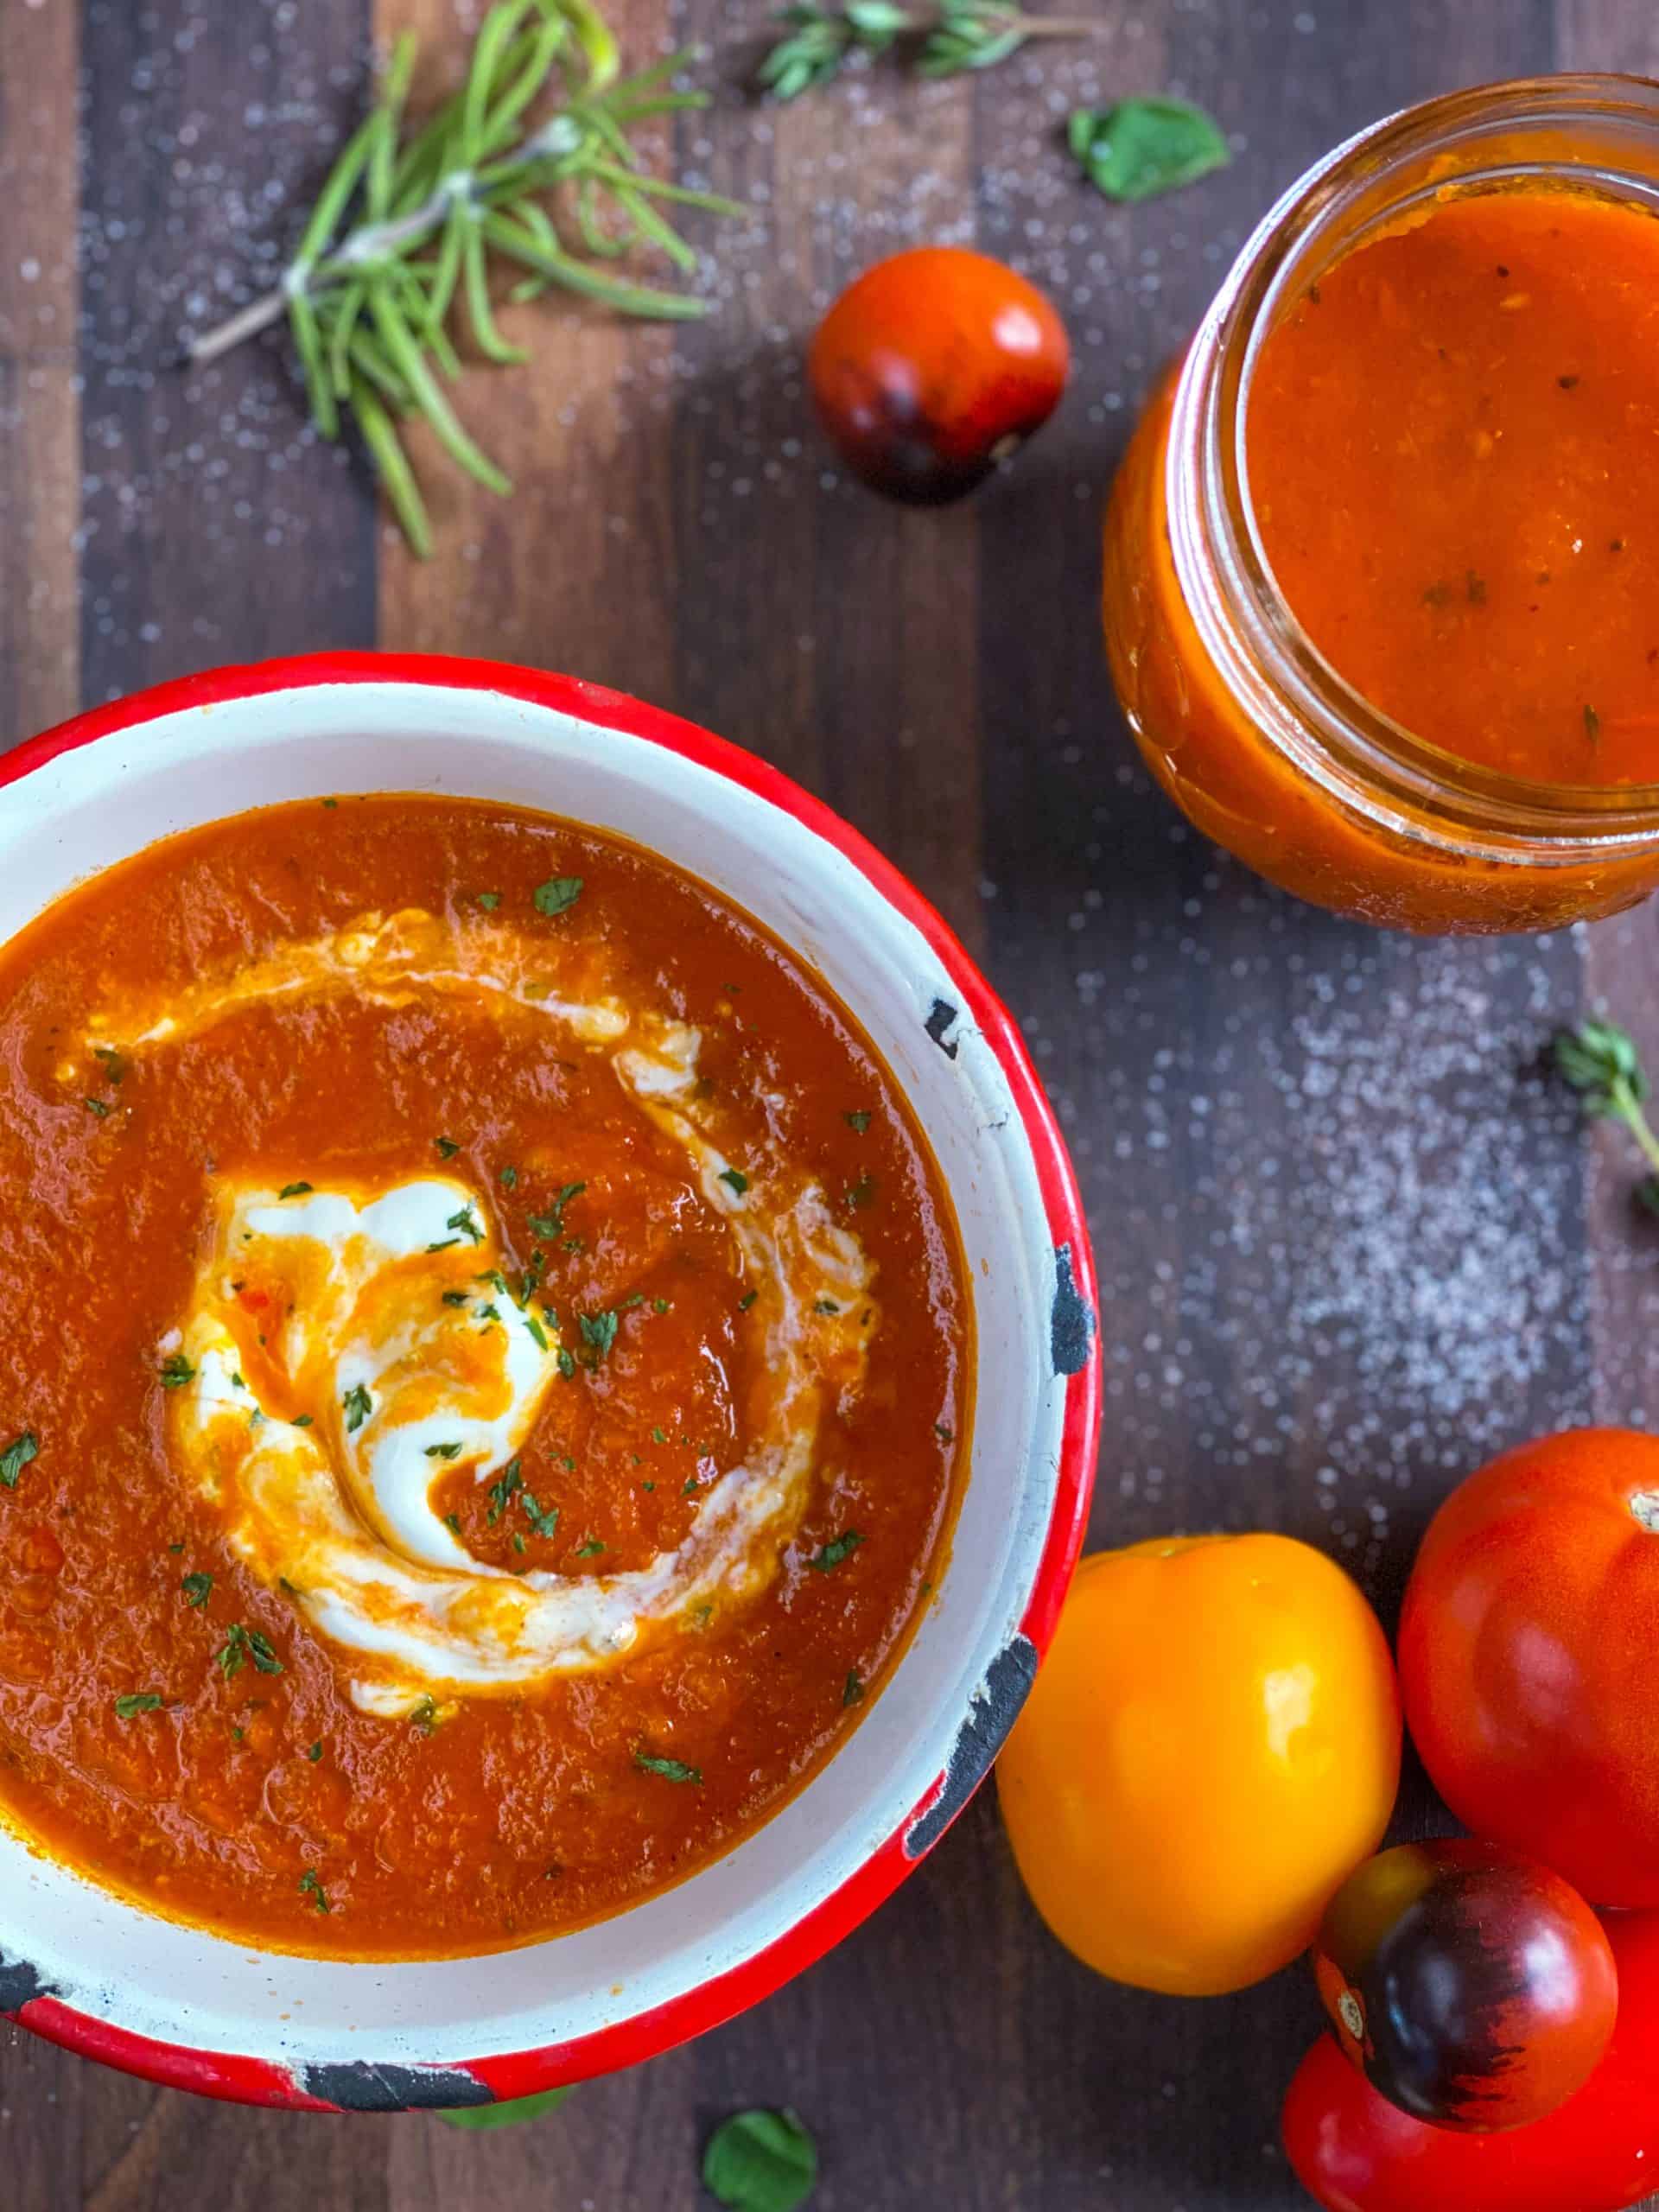 Roasted Garlic Tomato Soup Recipe With Canning Instructions